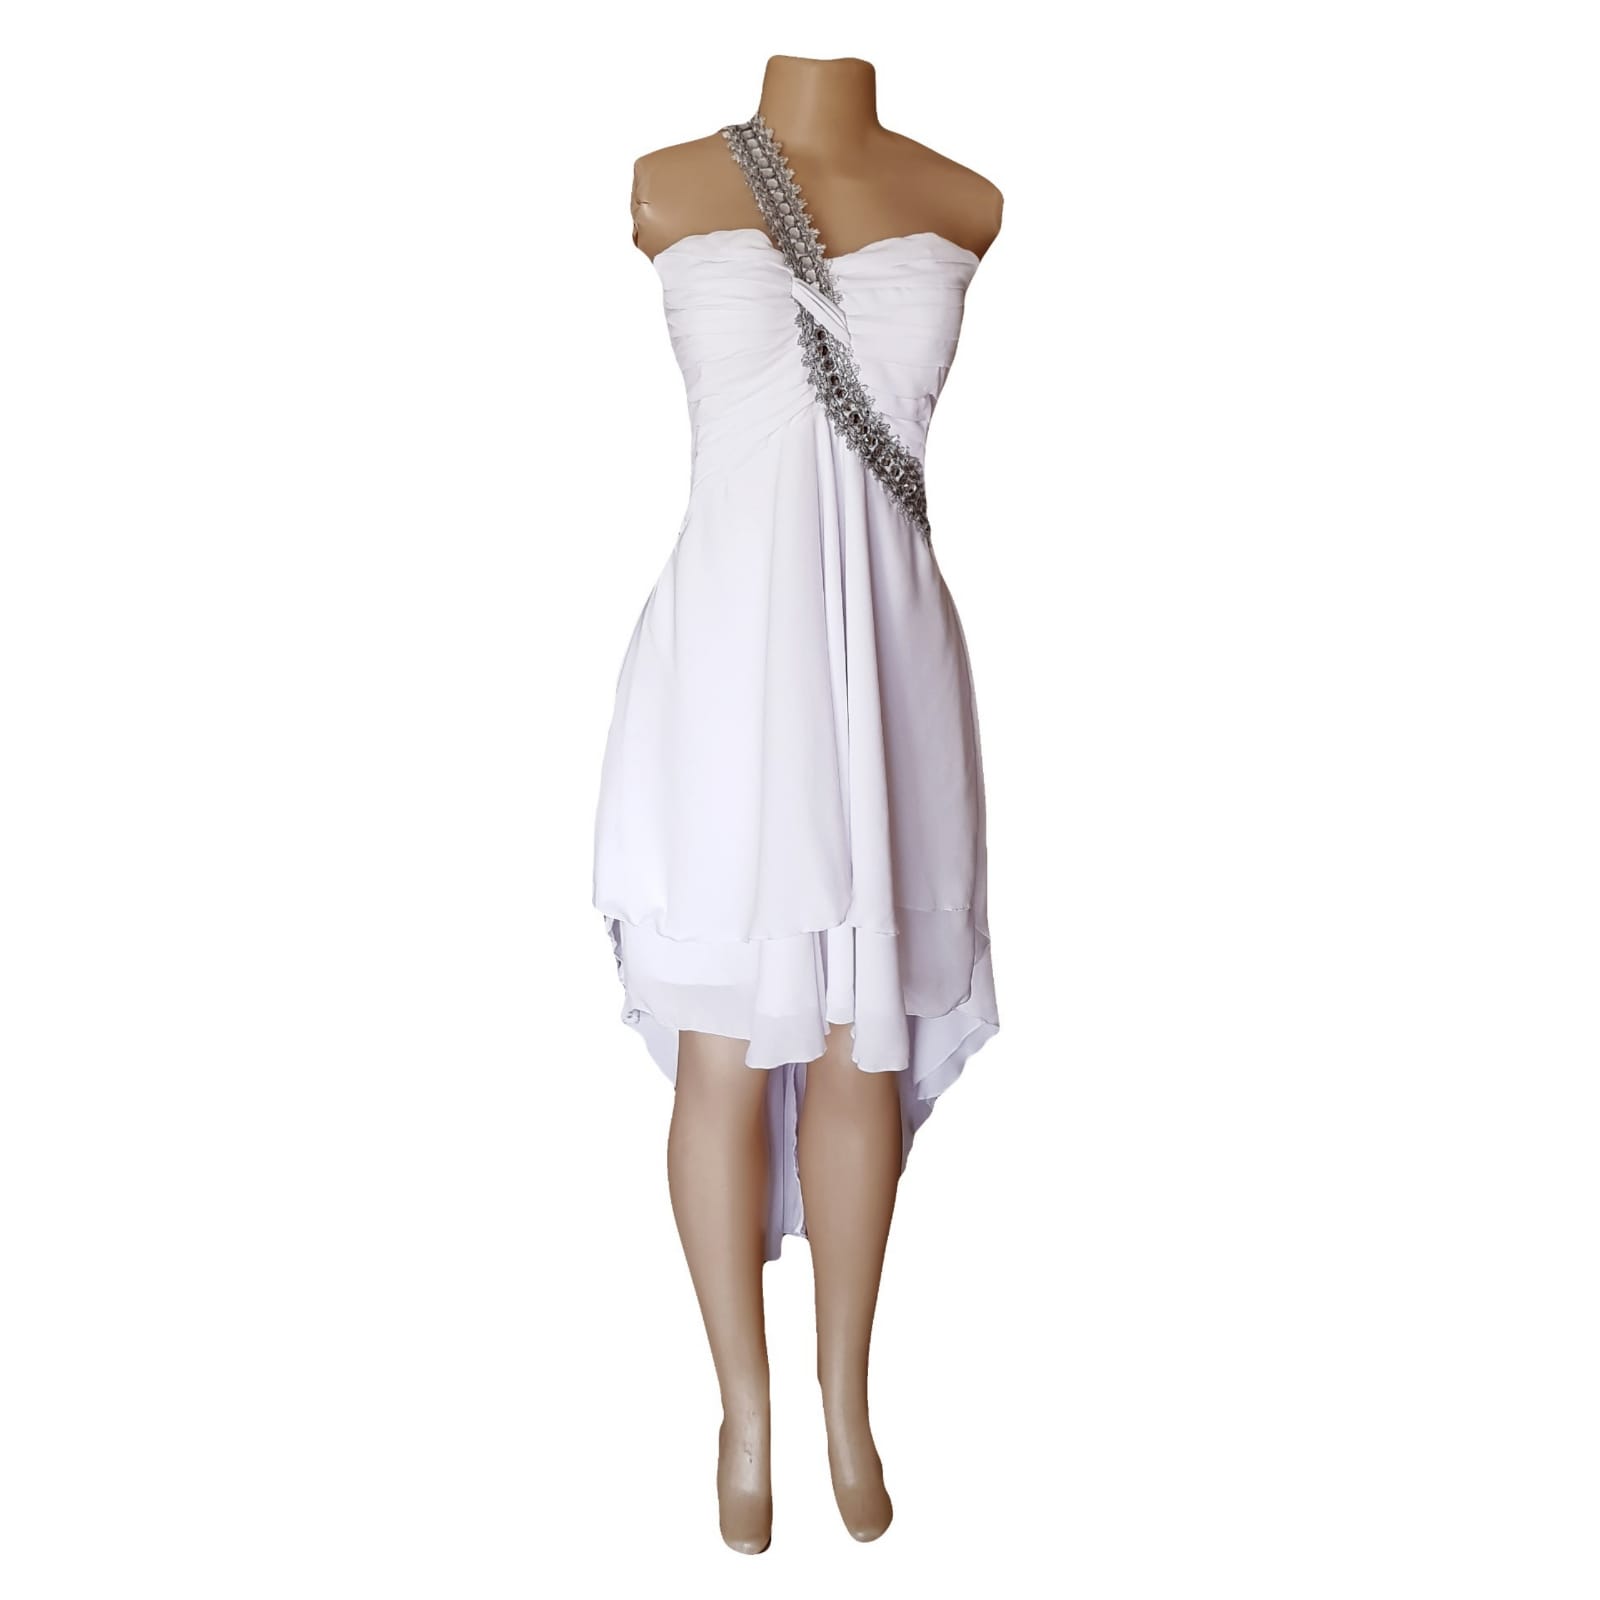 White hi lo beach wedding dress with ruched bodice 8 white hi lo beach wedding dress with ruched bodice and silver detailed strap in an angle from waist over the shoulder to the back. Chiffon bride dress with a doubler layer hi lo.